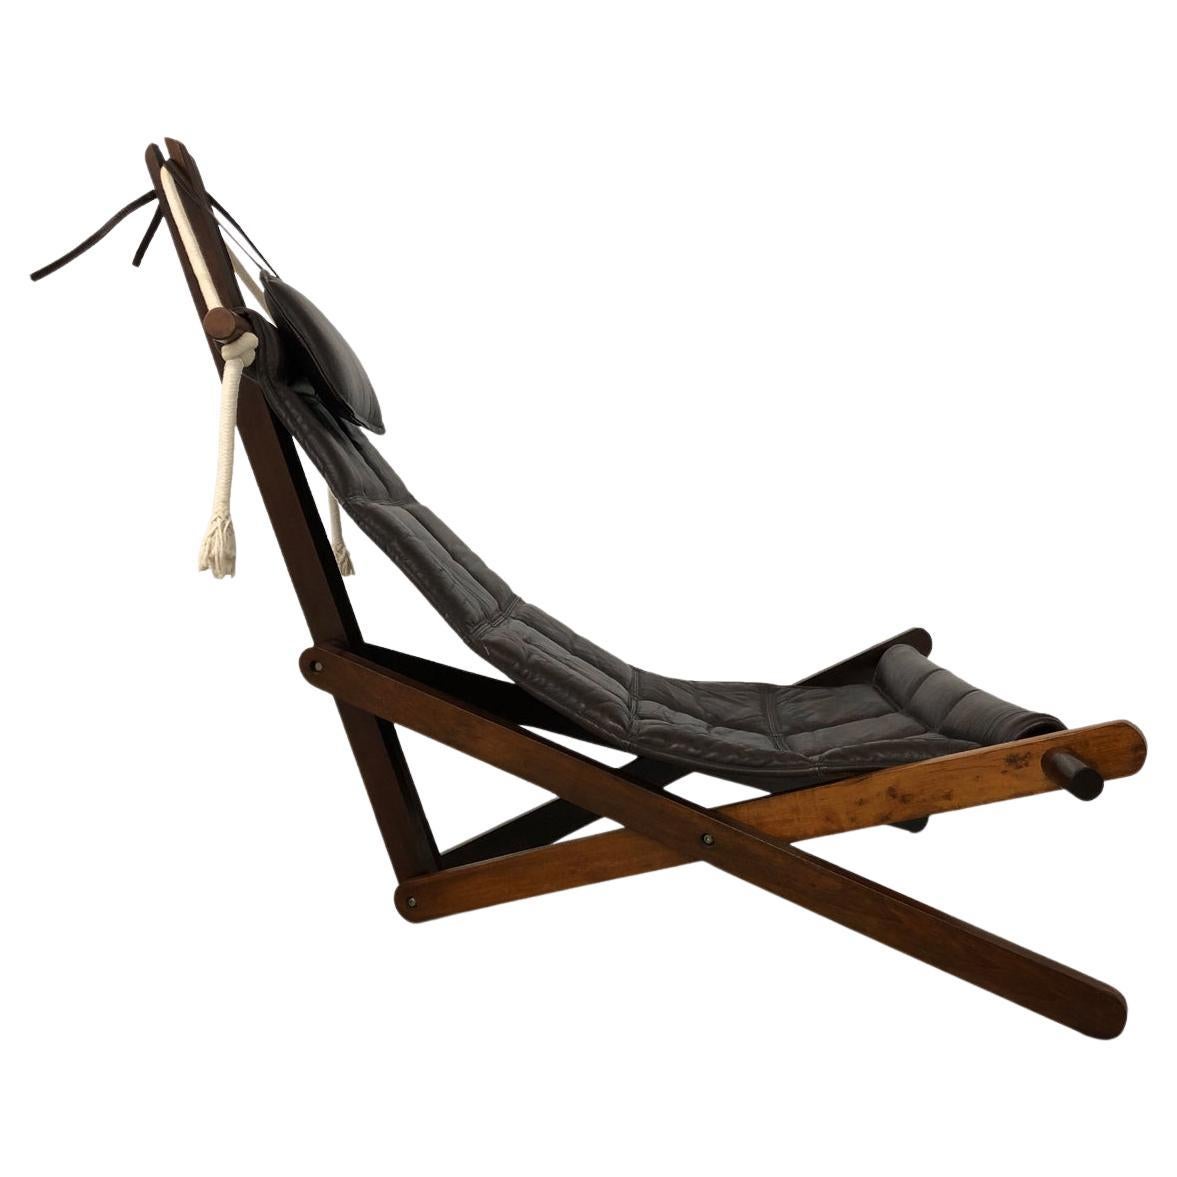 "Sail Chair" by Dominic Michaelis for Moveis Corazza of Brazil